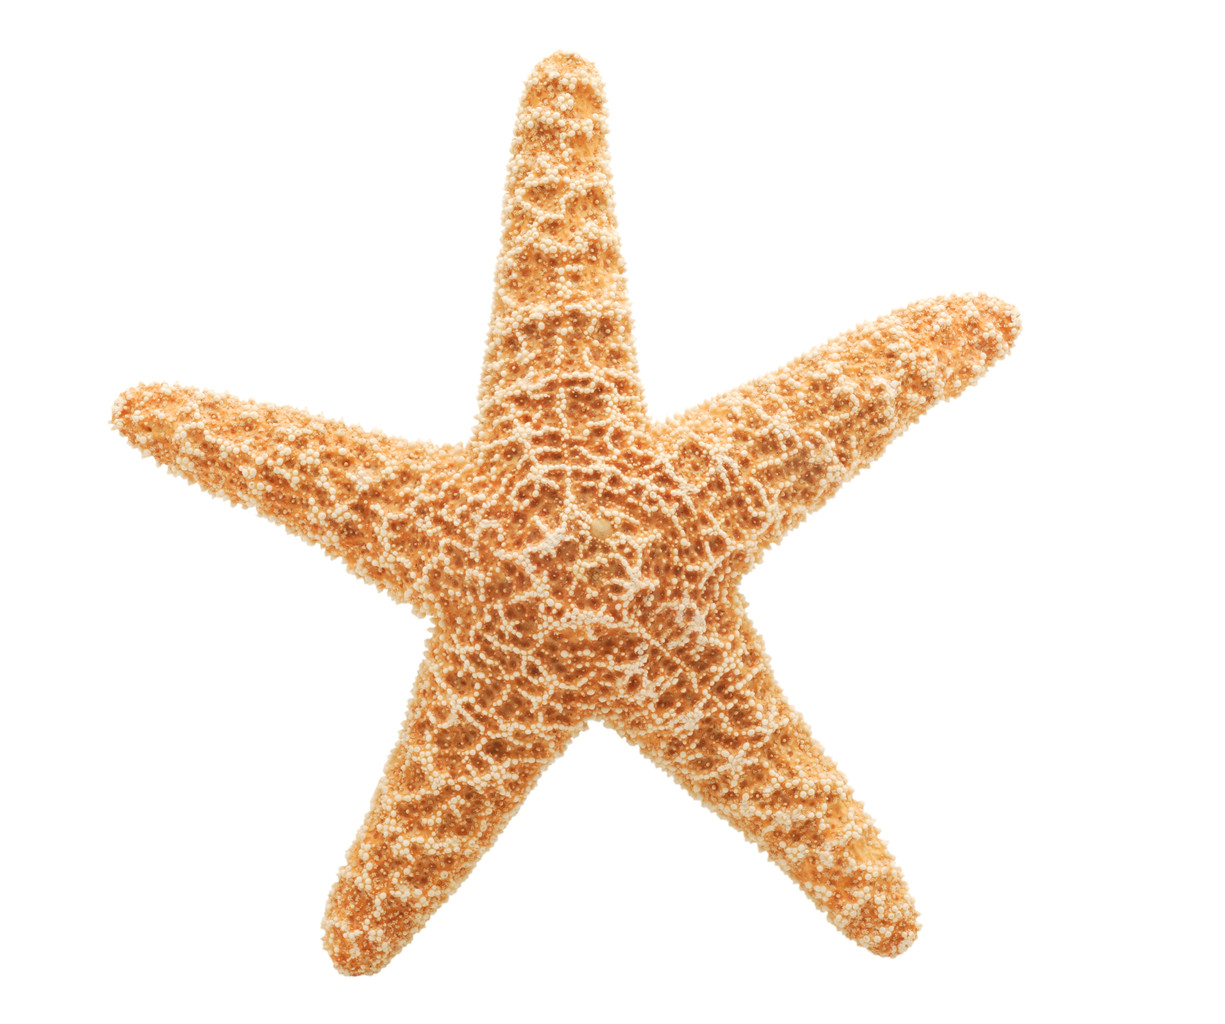 Free cliparts and others. 2 clipart starfish